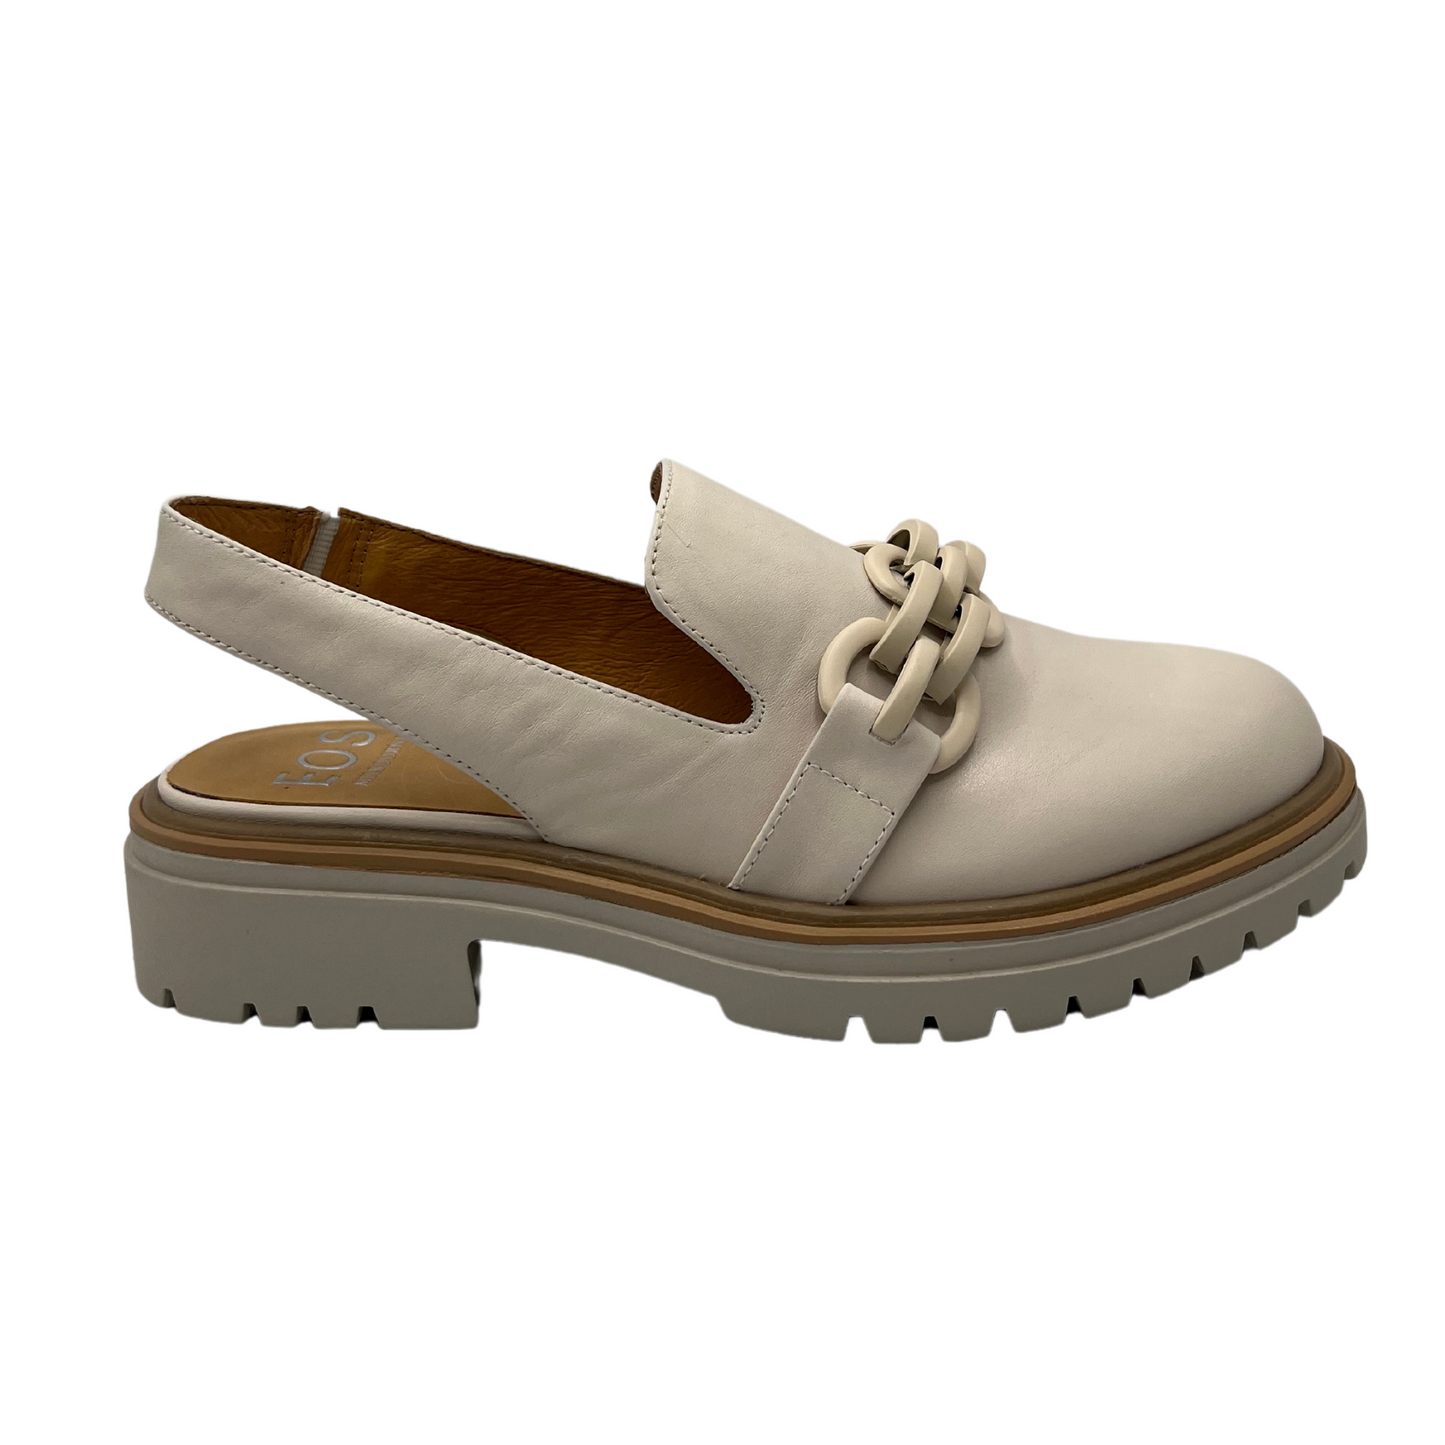 Right facing view of leather loafer style sling back with chunky sole